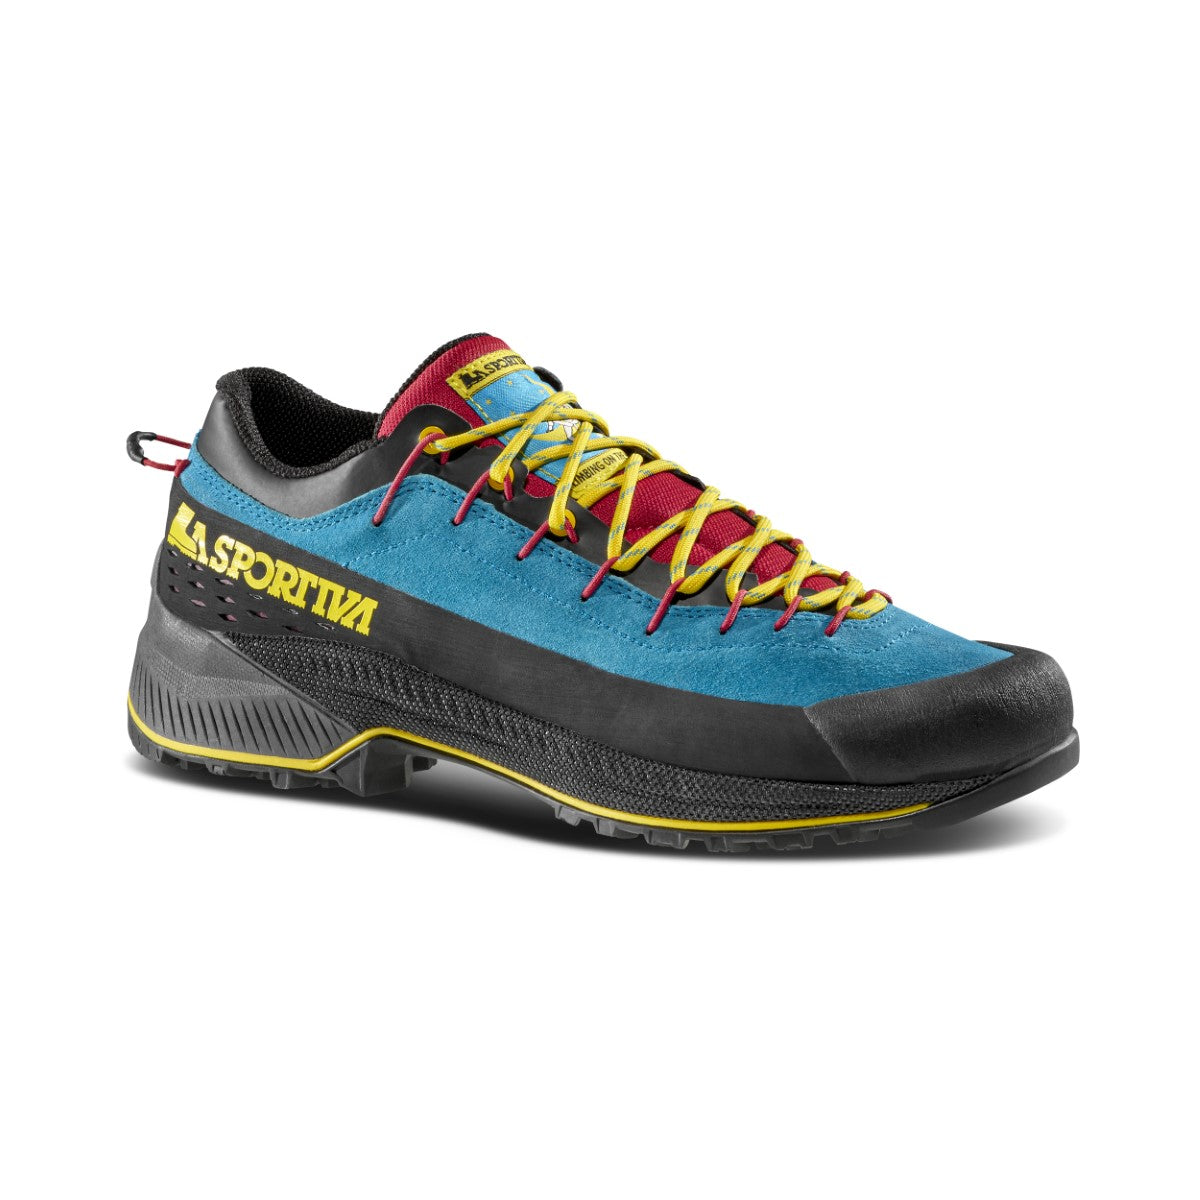 La Sportiva TX4 R mens approach shoes in turquoise/yellow